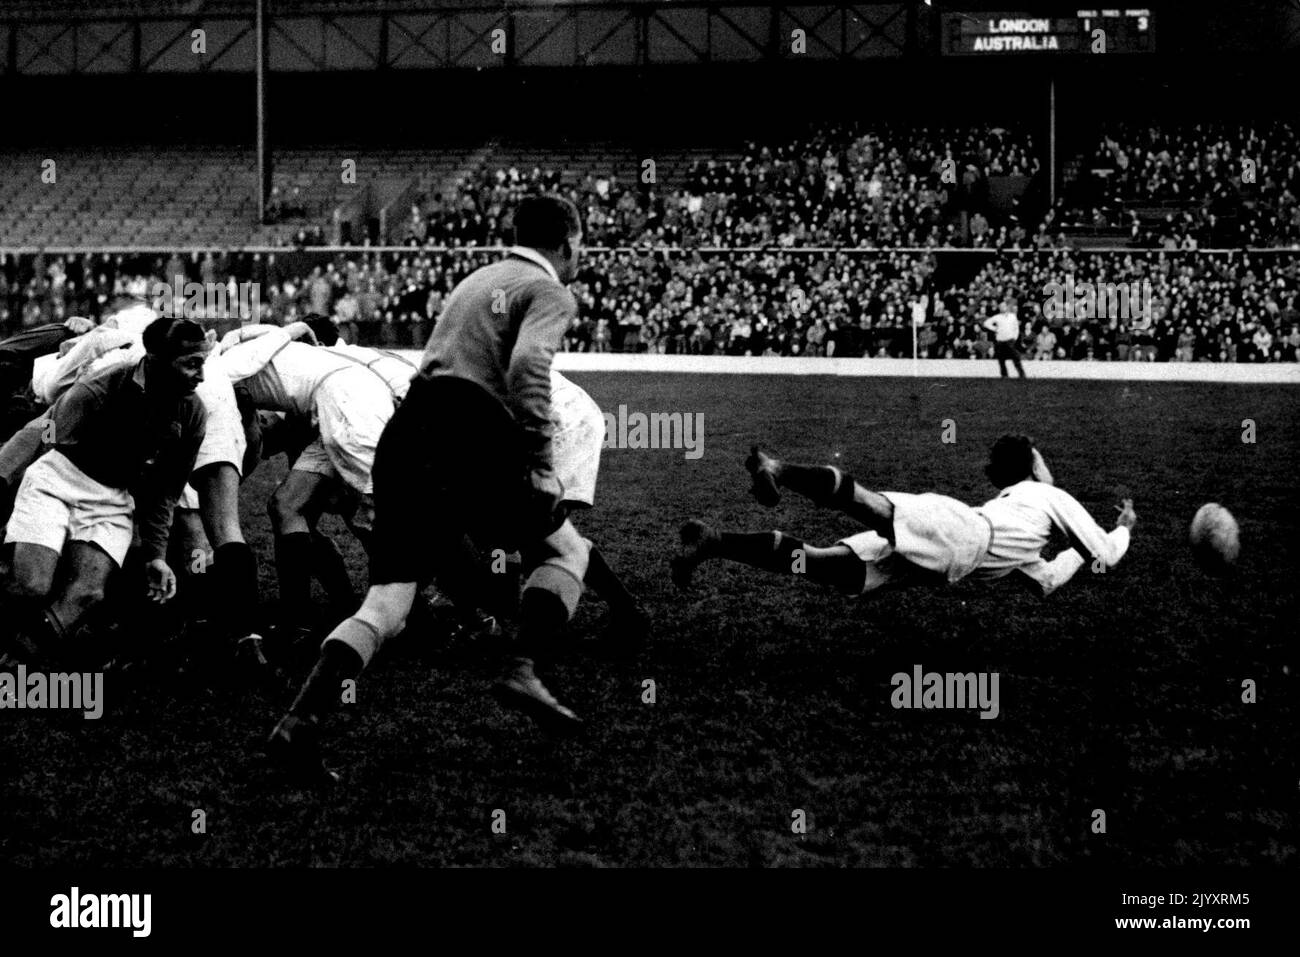 Holiday Rugby -- P. W. Sykes, London's scrum-half, makes a speedy dive and gets the ball away from a scrum break-up to his forward line. Australians meet London Counties at Twickenham, London. Dive Pass. London Counties half-back P. W. Sykes dives as he shoots the ball to a support. Plunging forward in the dark pants is the referee. London Counties won. December 26, 1947. (Photo by Sport & General Press Agency Limited). Stock Photo